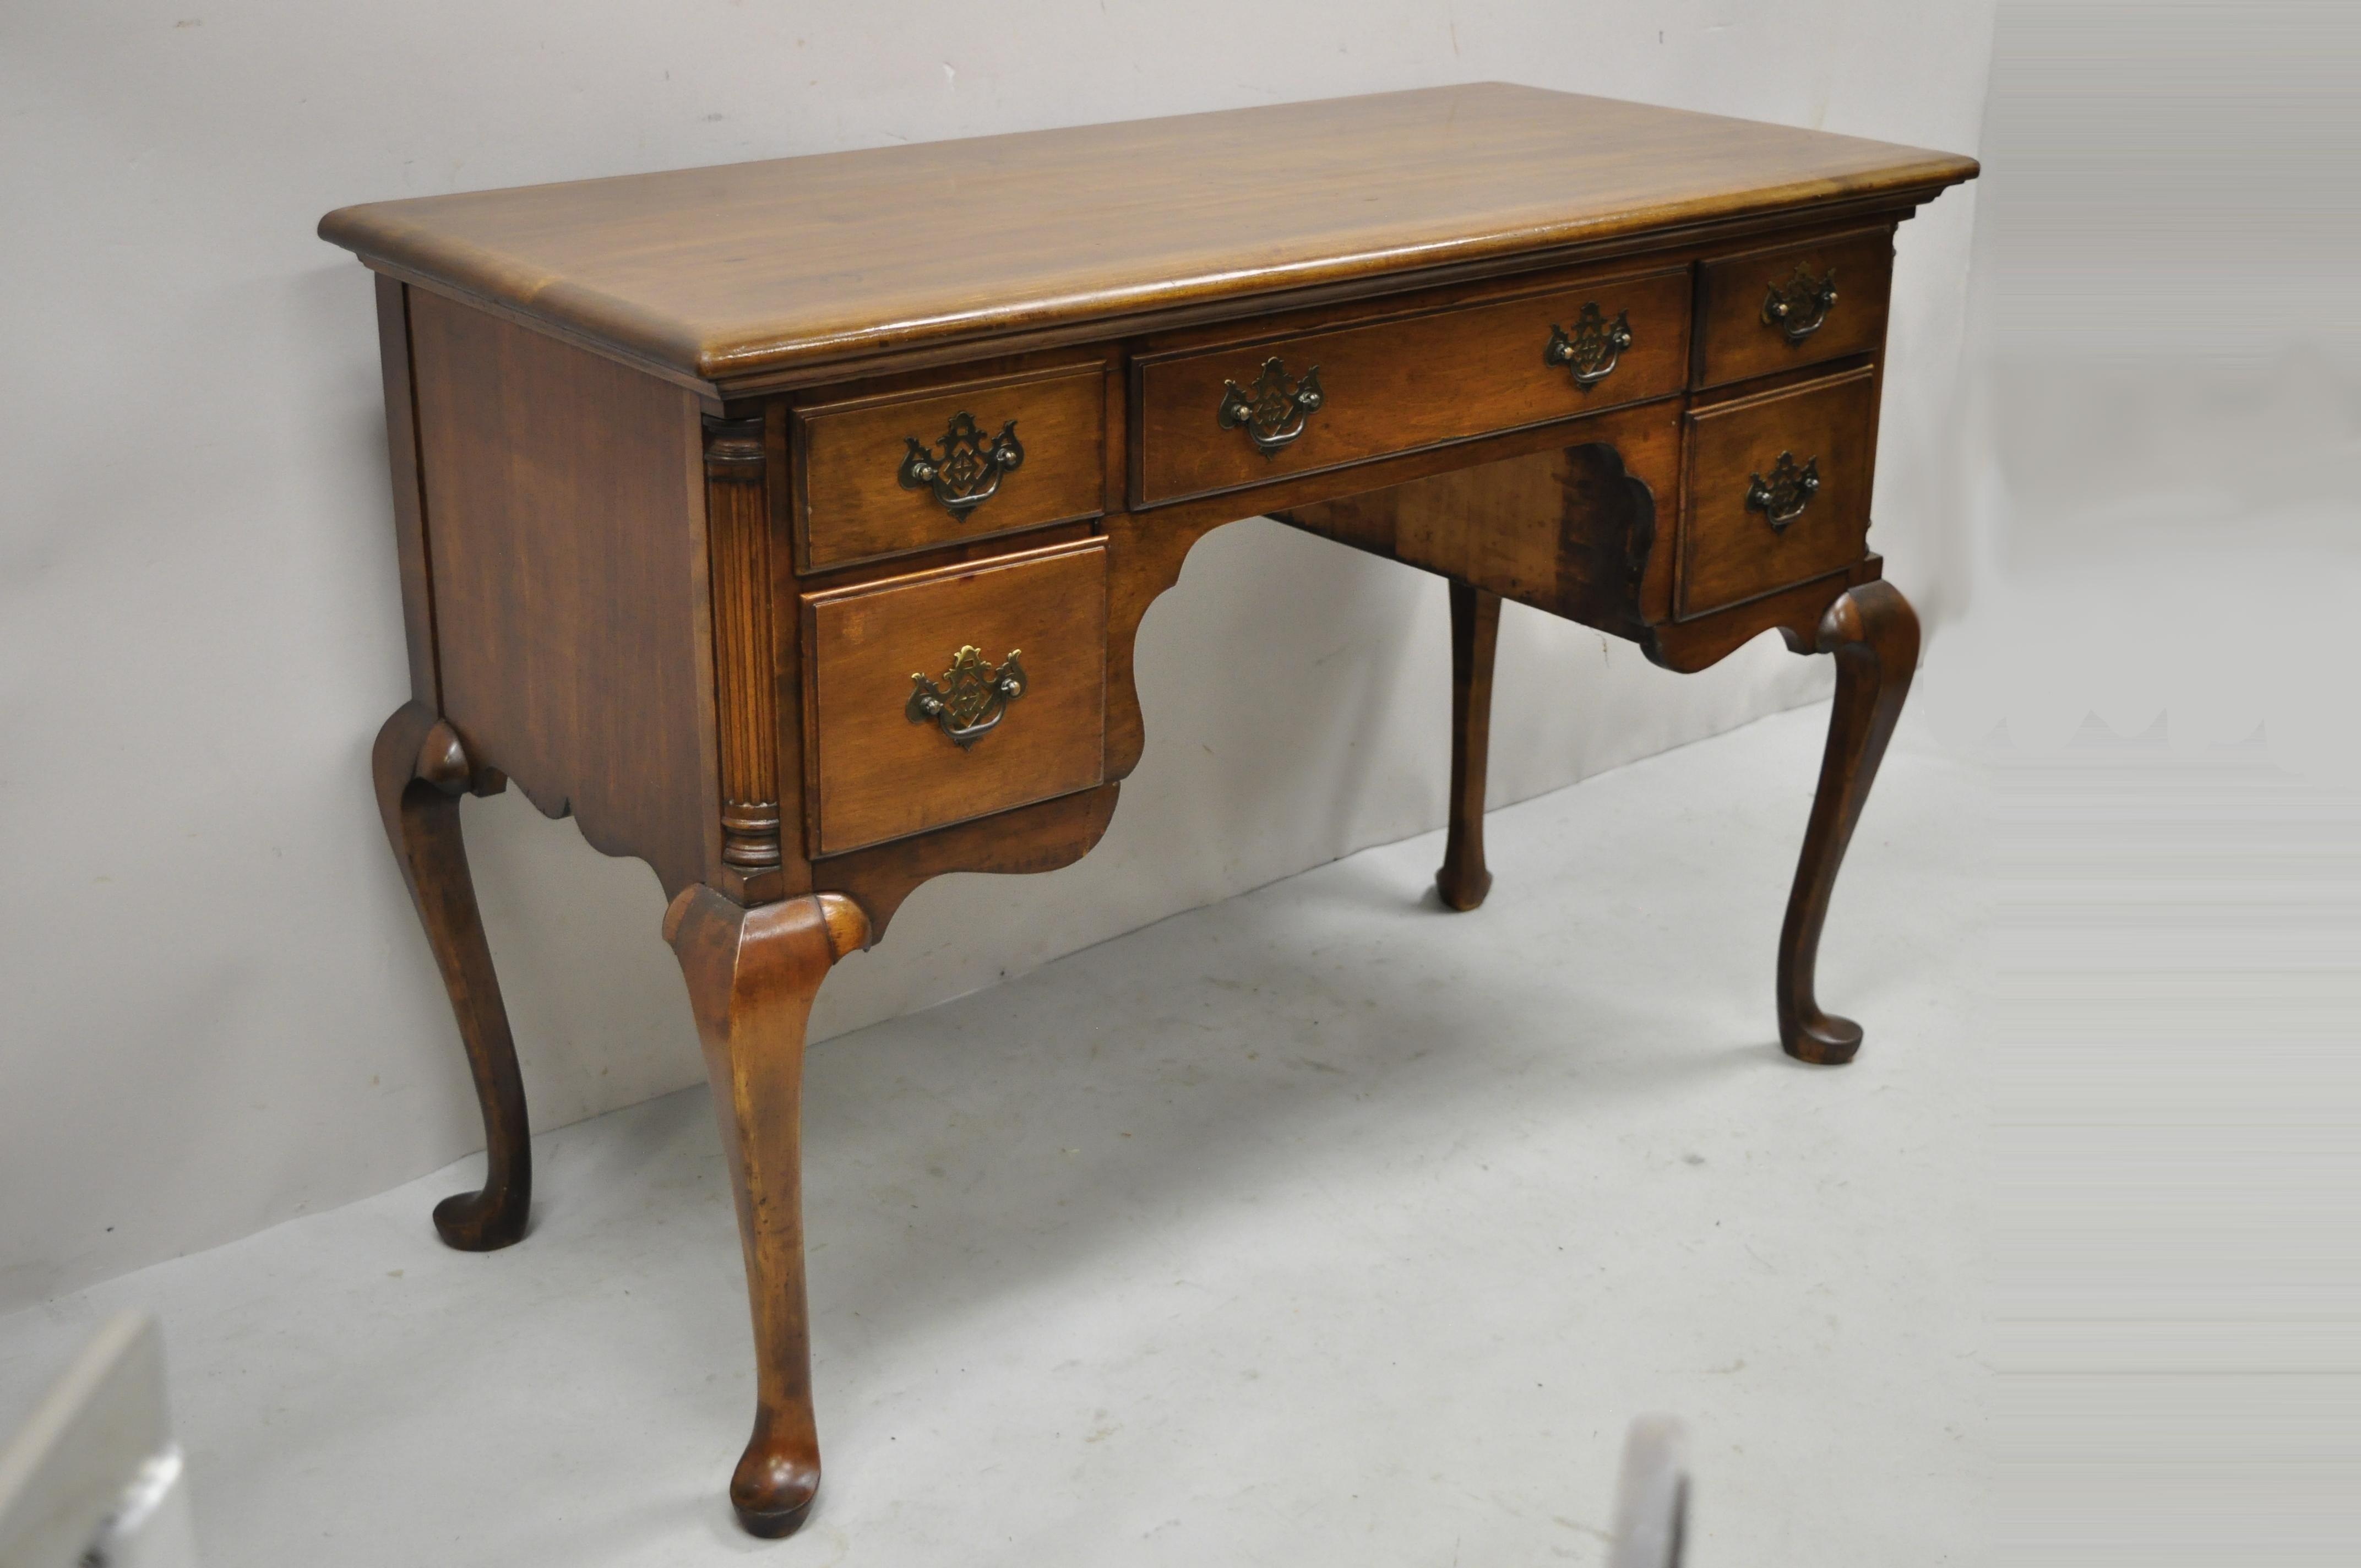 Antique English Queen Anne style mahogany kneehole writing desk with 5 Drawers. Item features shapely Queen Anne legs, solid wood construction, beautiful wood grain, 5 dovetailed drawers, solid brass hardware, very nice antique item, great style and